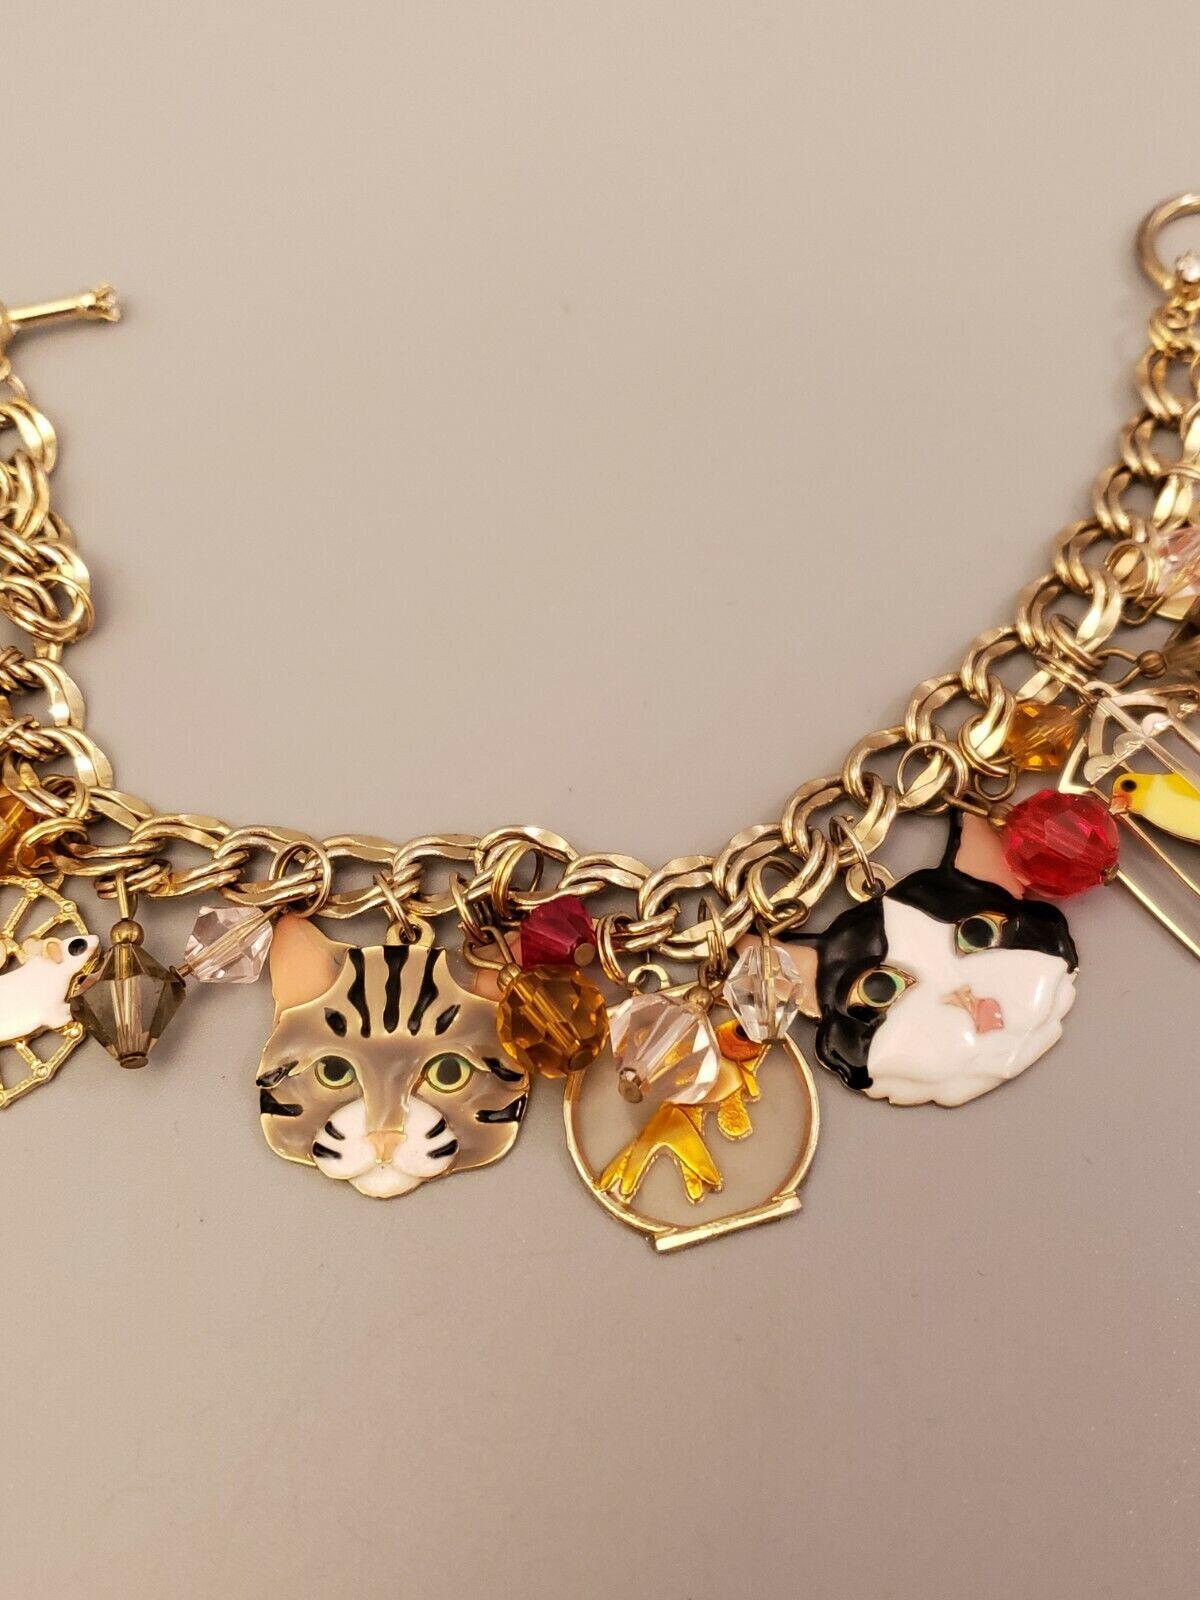 Simply Delightful! Vintage Signed Lunch at the Ritz Multi Charm Cat, Mouse and Bird in a Cage Bracelet. Enamel, Gold Tone. Measuring approx. 7.5” Long. Excellent Condition. Chic and Fun to Wear! Sure to be admired...A piece you'll turn to time and